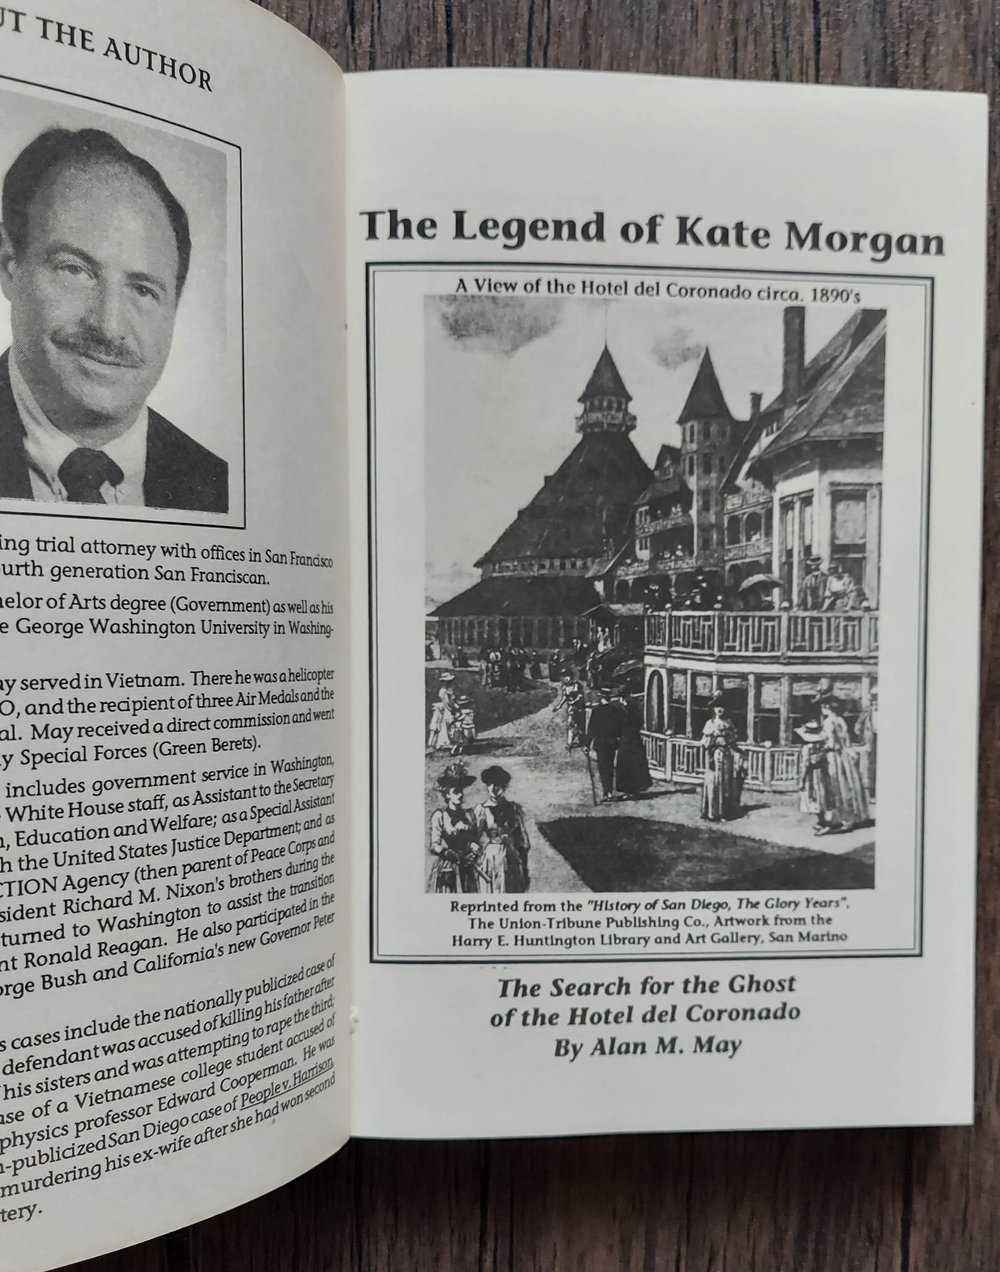 The Legend of Kate Morgan: The Search for the Ghost of the Hotel del Coronado, by Alan M. May